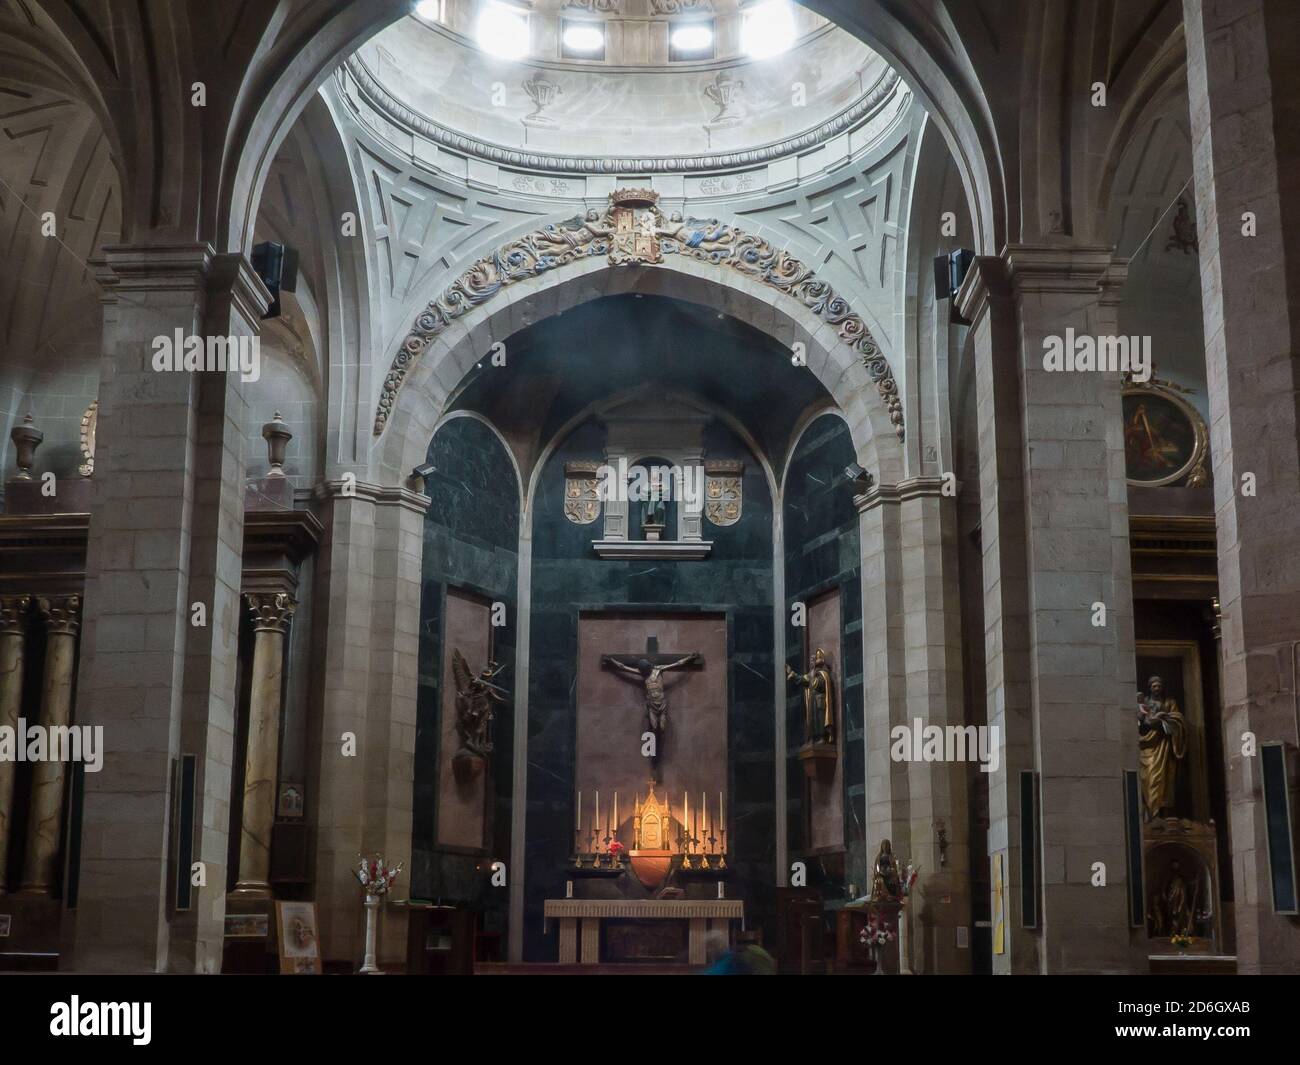 BELORADO, SPAIN - Jul 30, 2015: Interior of an old church on the Way of St.James in Spain Stock Photo